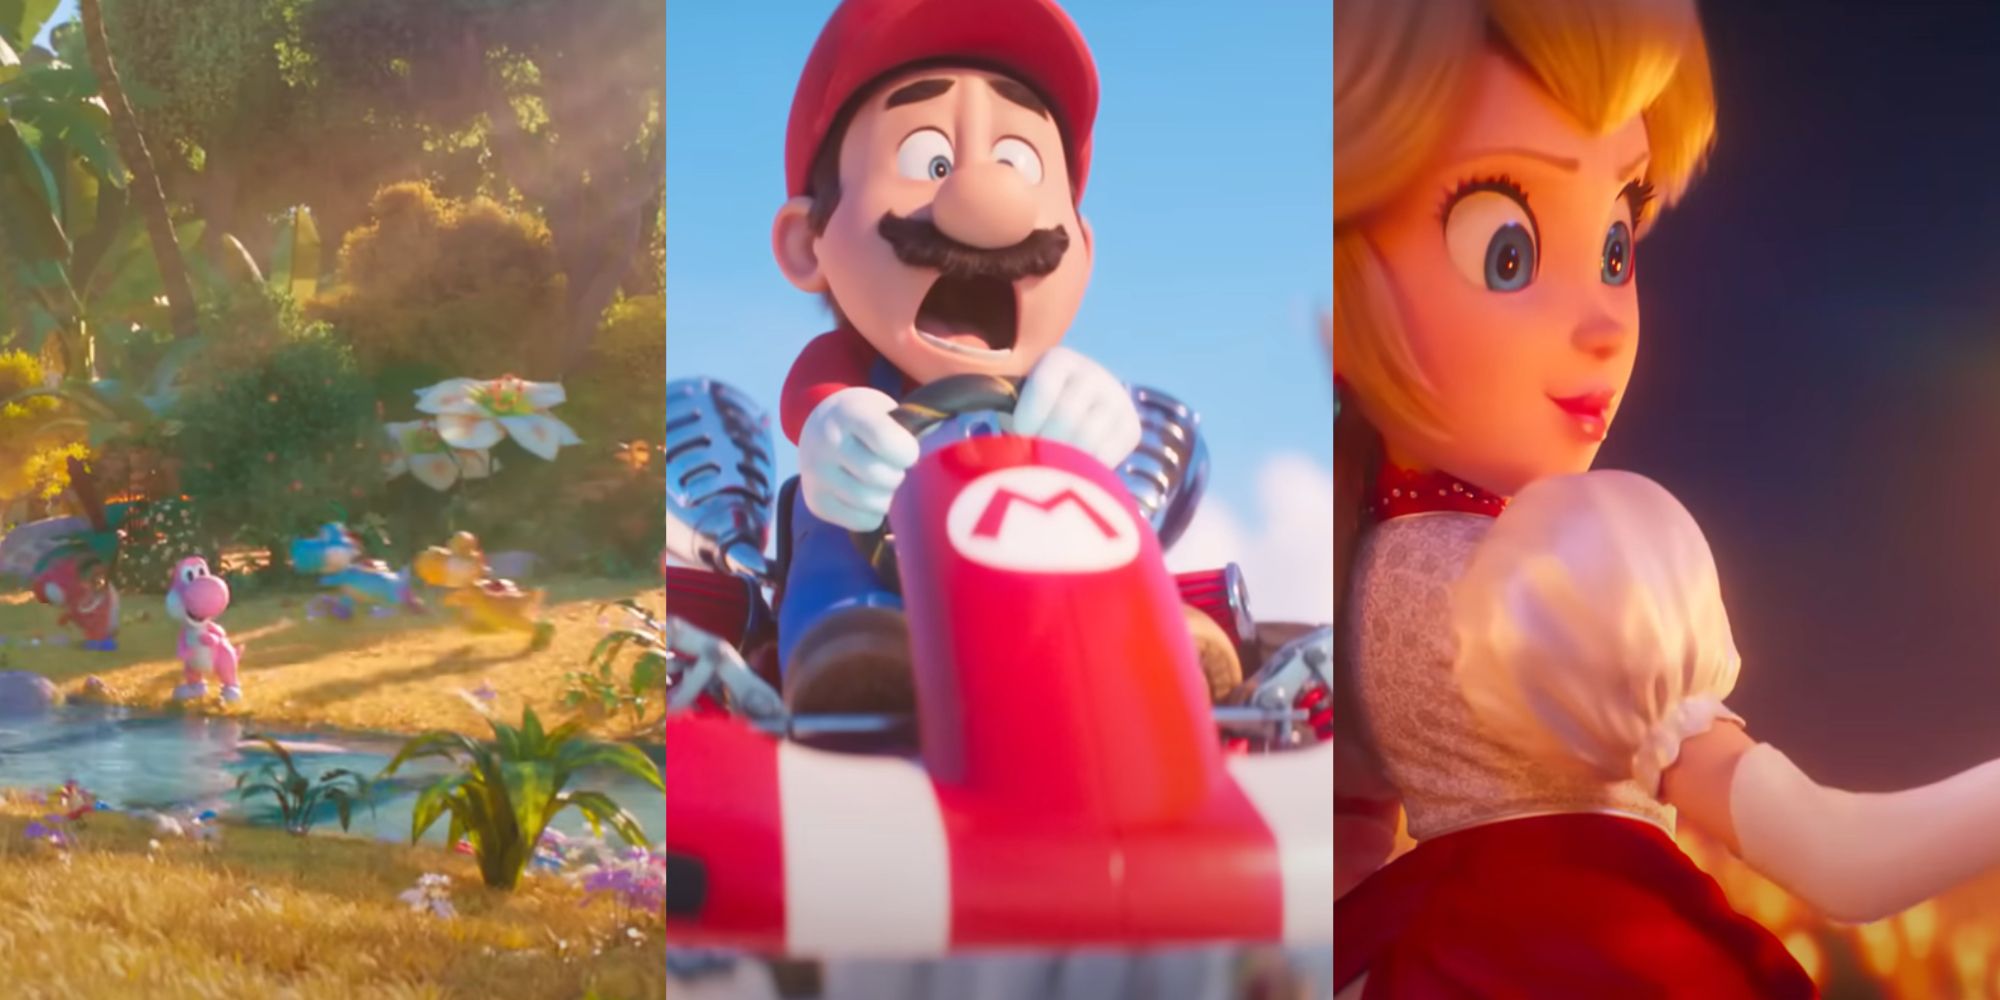 Super Mario: 10 Details You Might Have Missed In The Movie Trailer